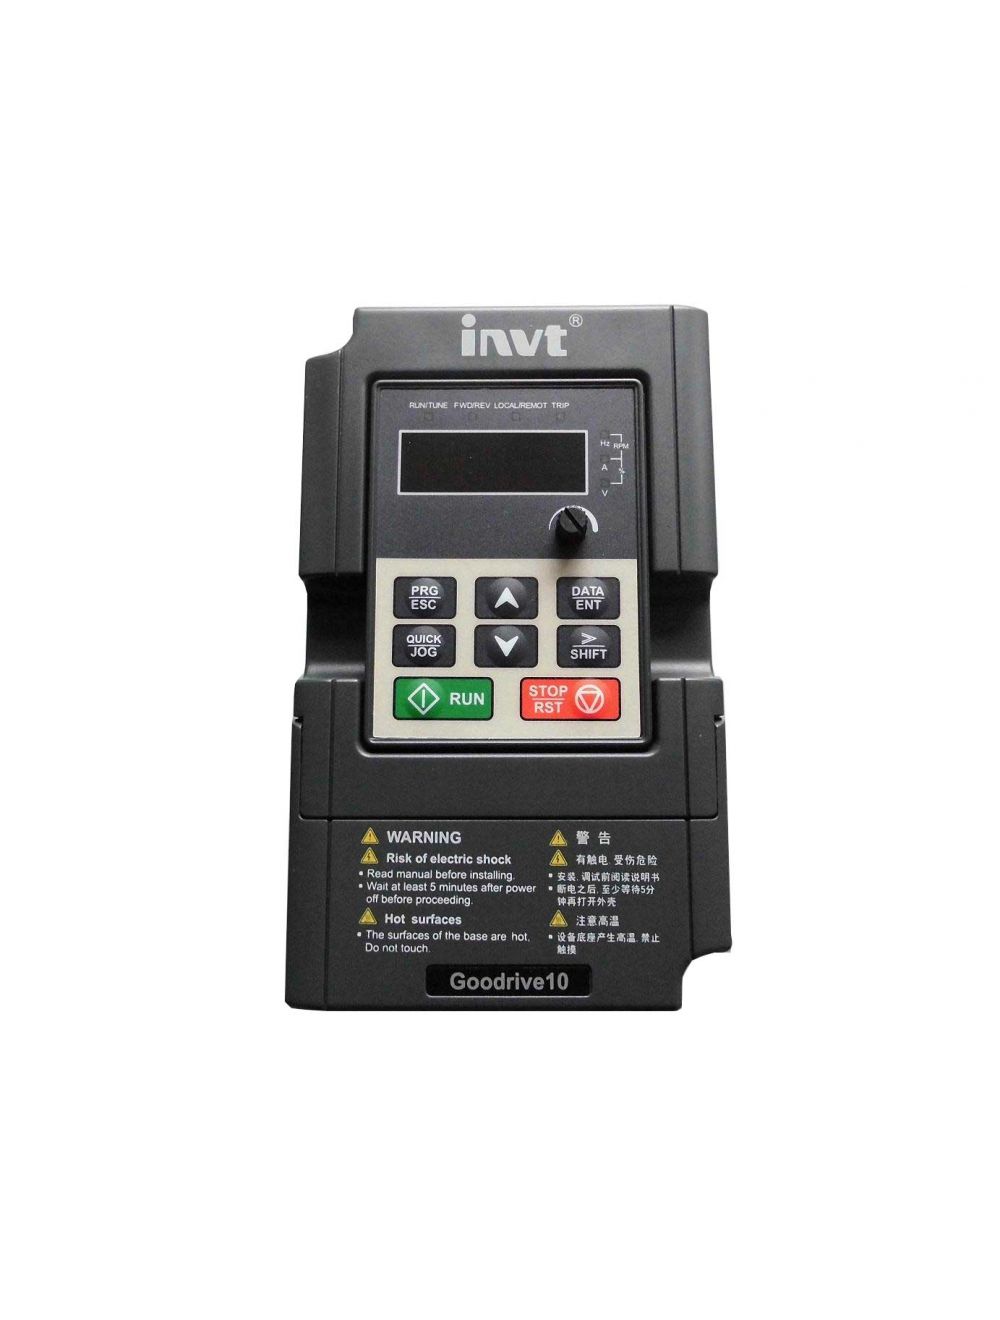 New In stock for sale, INVT VFD Frequency Converter GD10-0R7G-4-B